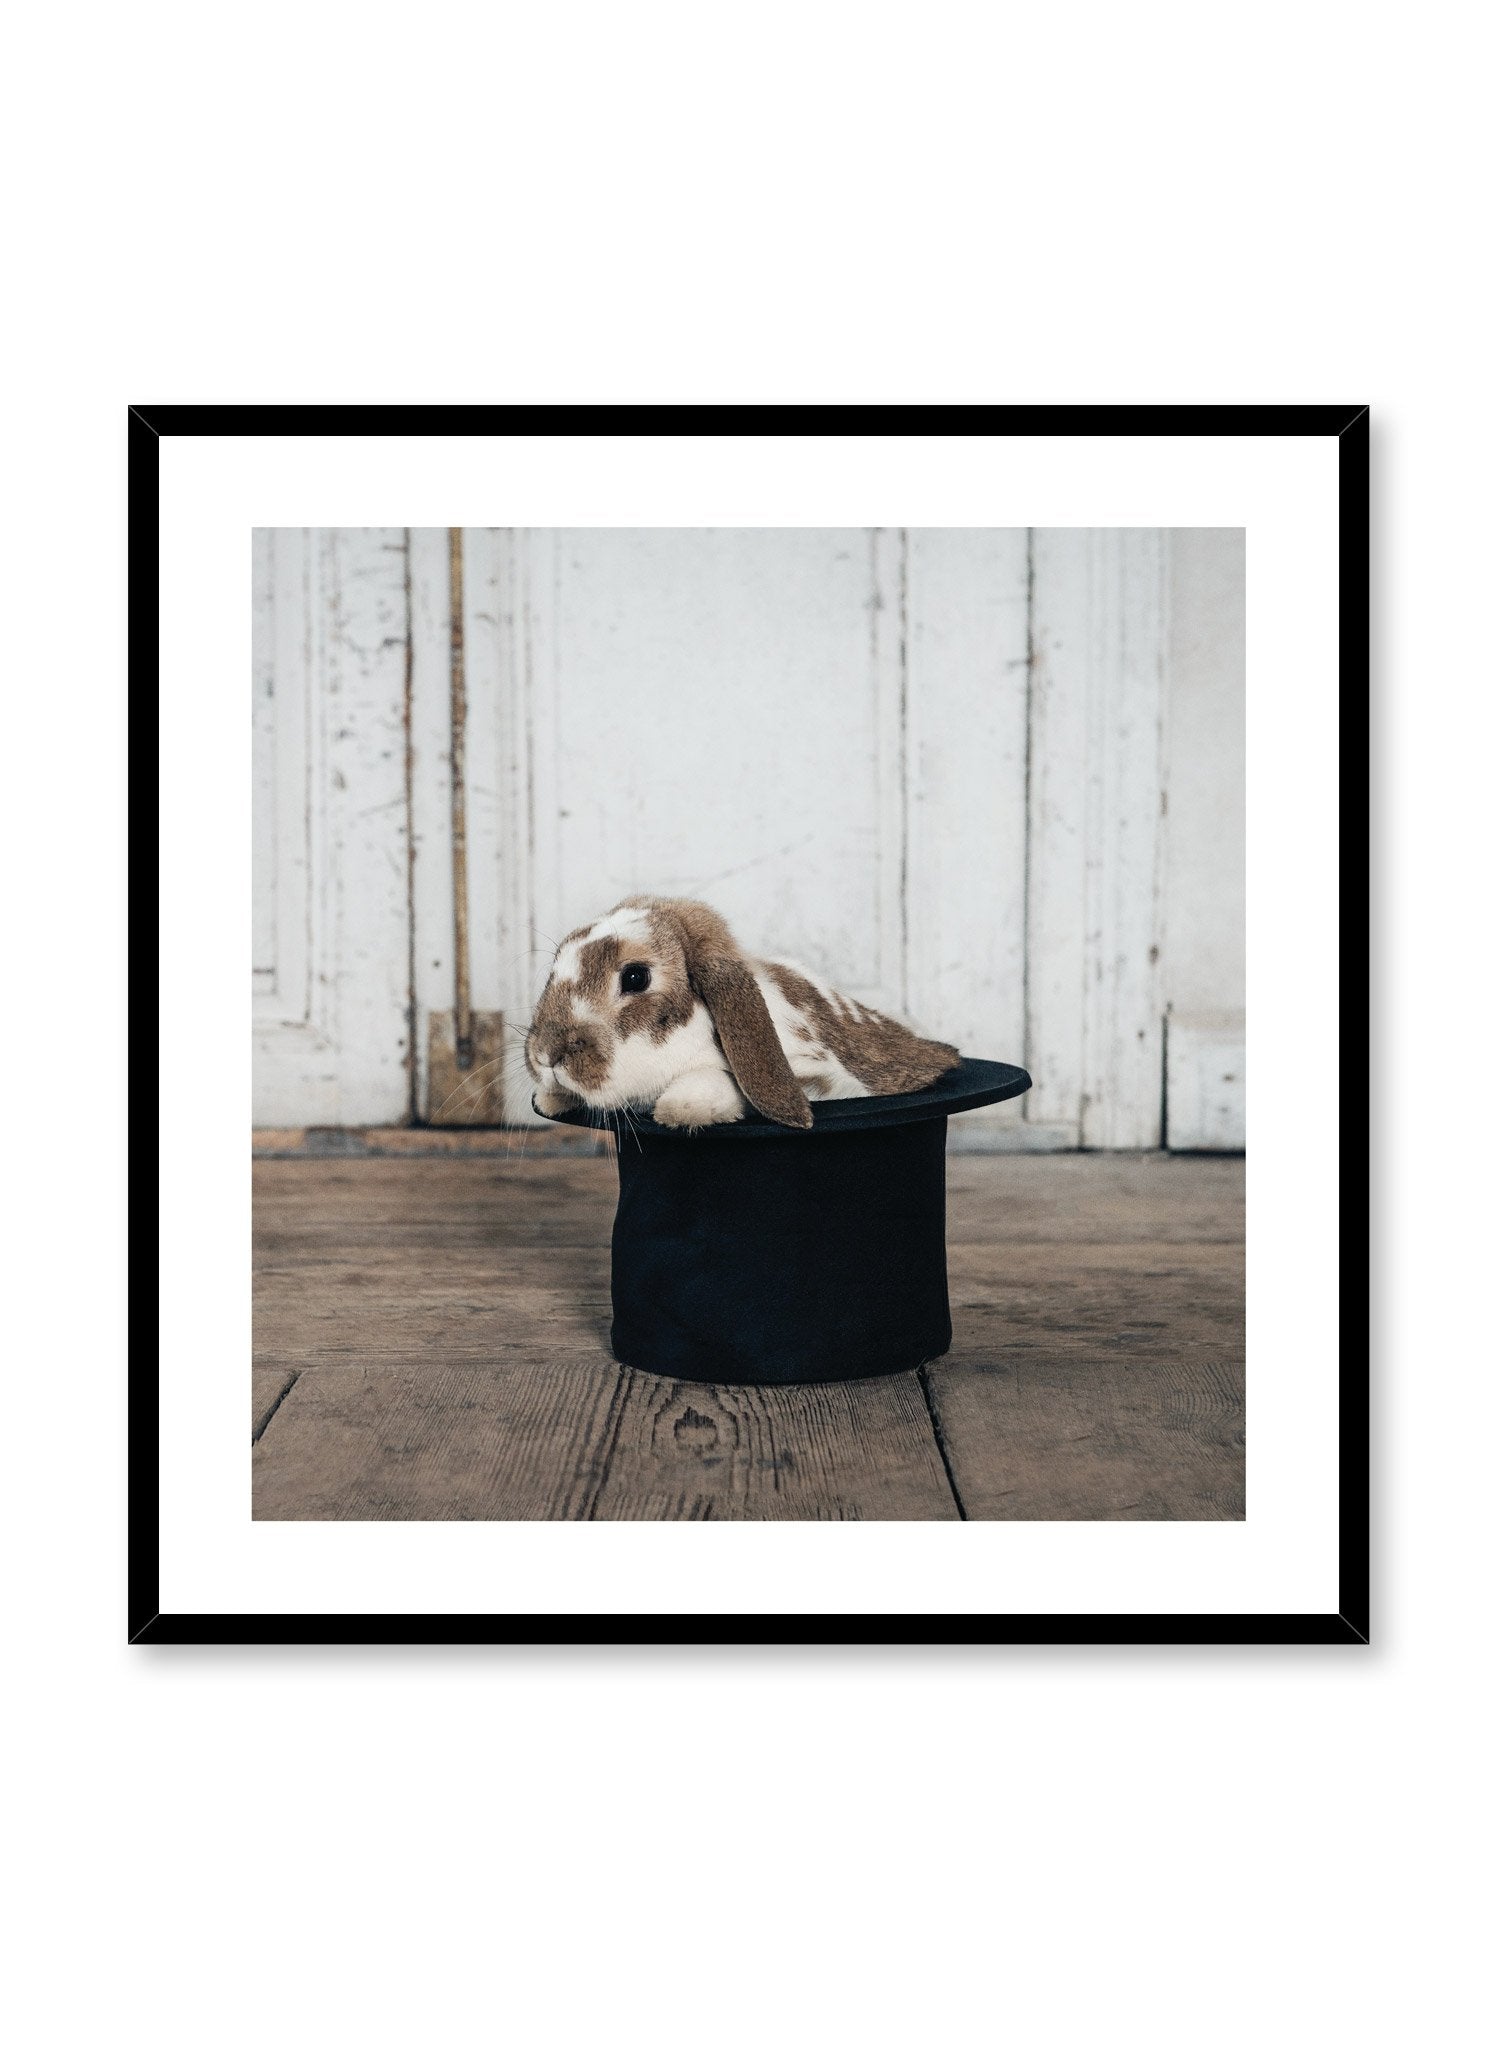 Minimalist design photography poster of Hat Trick rabbit by Love Warriors Creative Studio - Buy at Opposite Wall